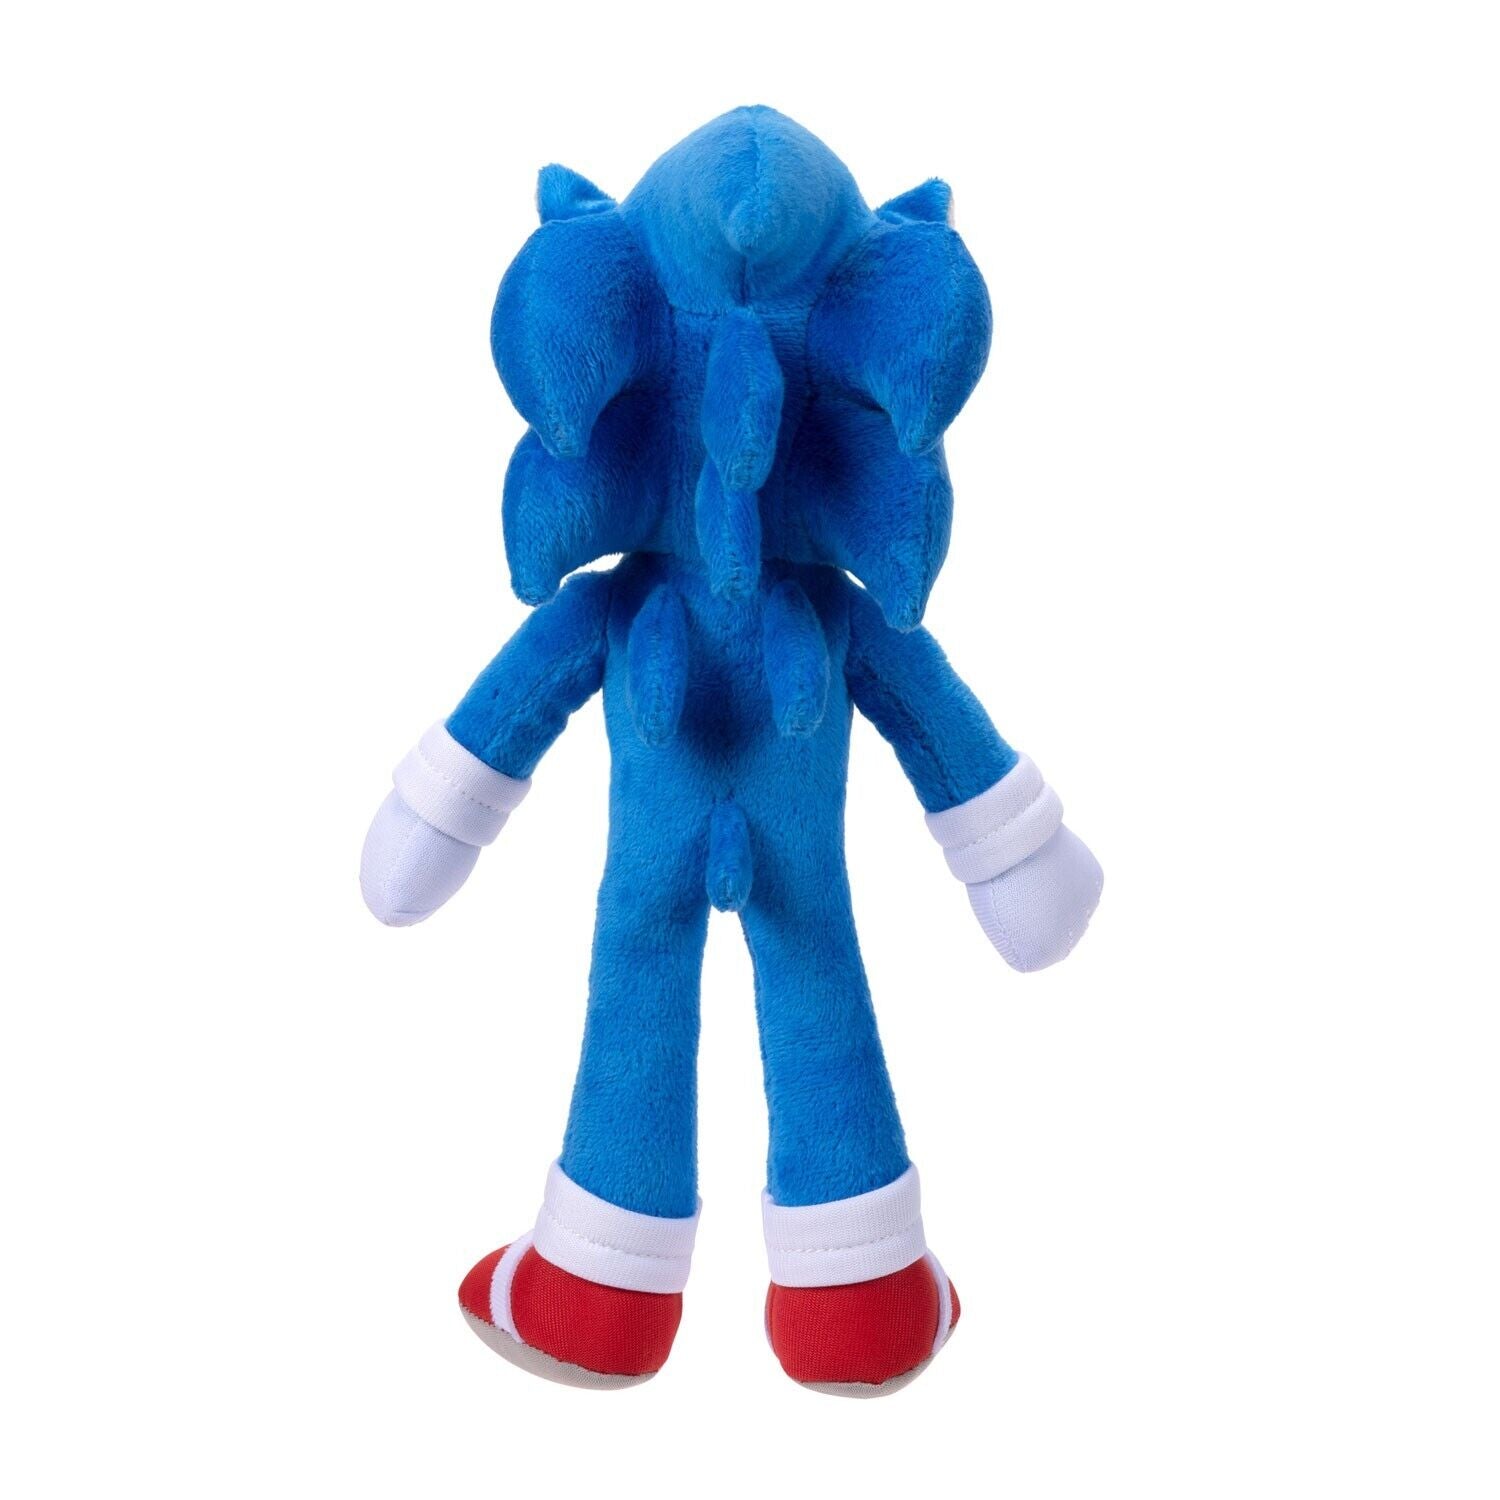 BRAND NEW Sonic The Hedgehog 2 Movie 9-Inch Plush Sonic - Collectible Toy